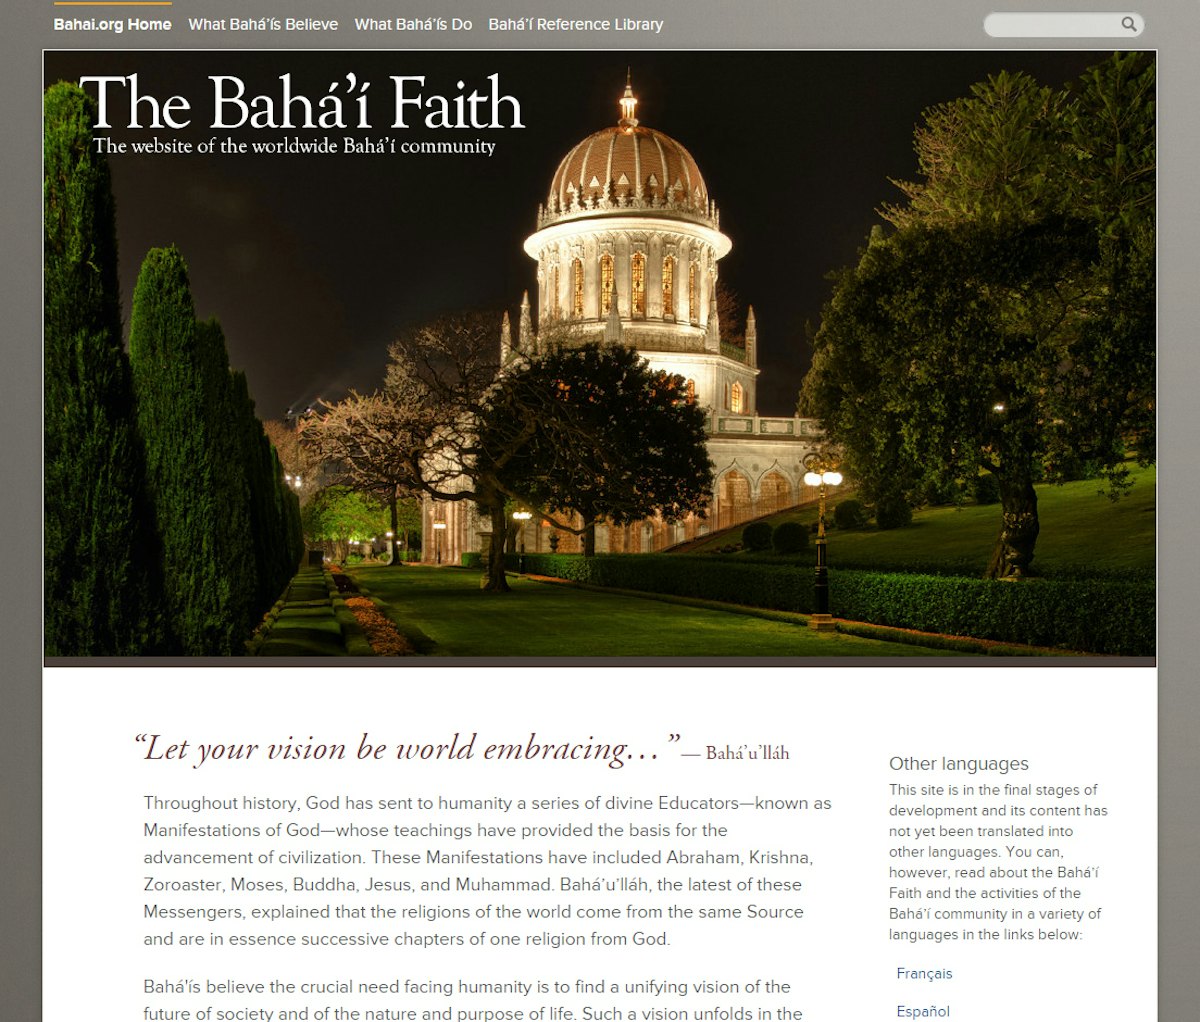 The home page of the new Bahai.org website.